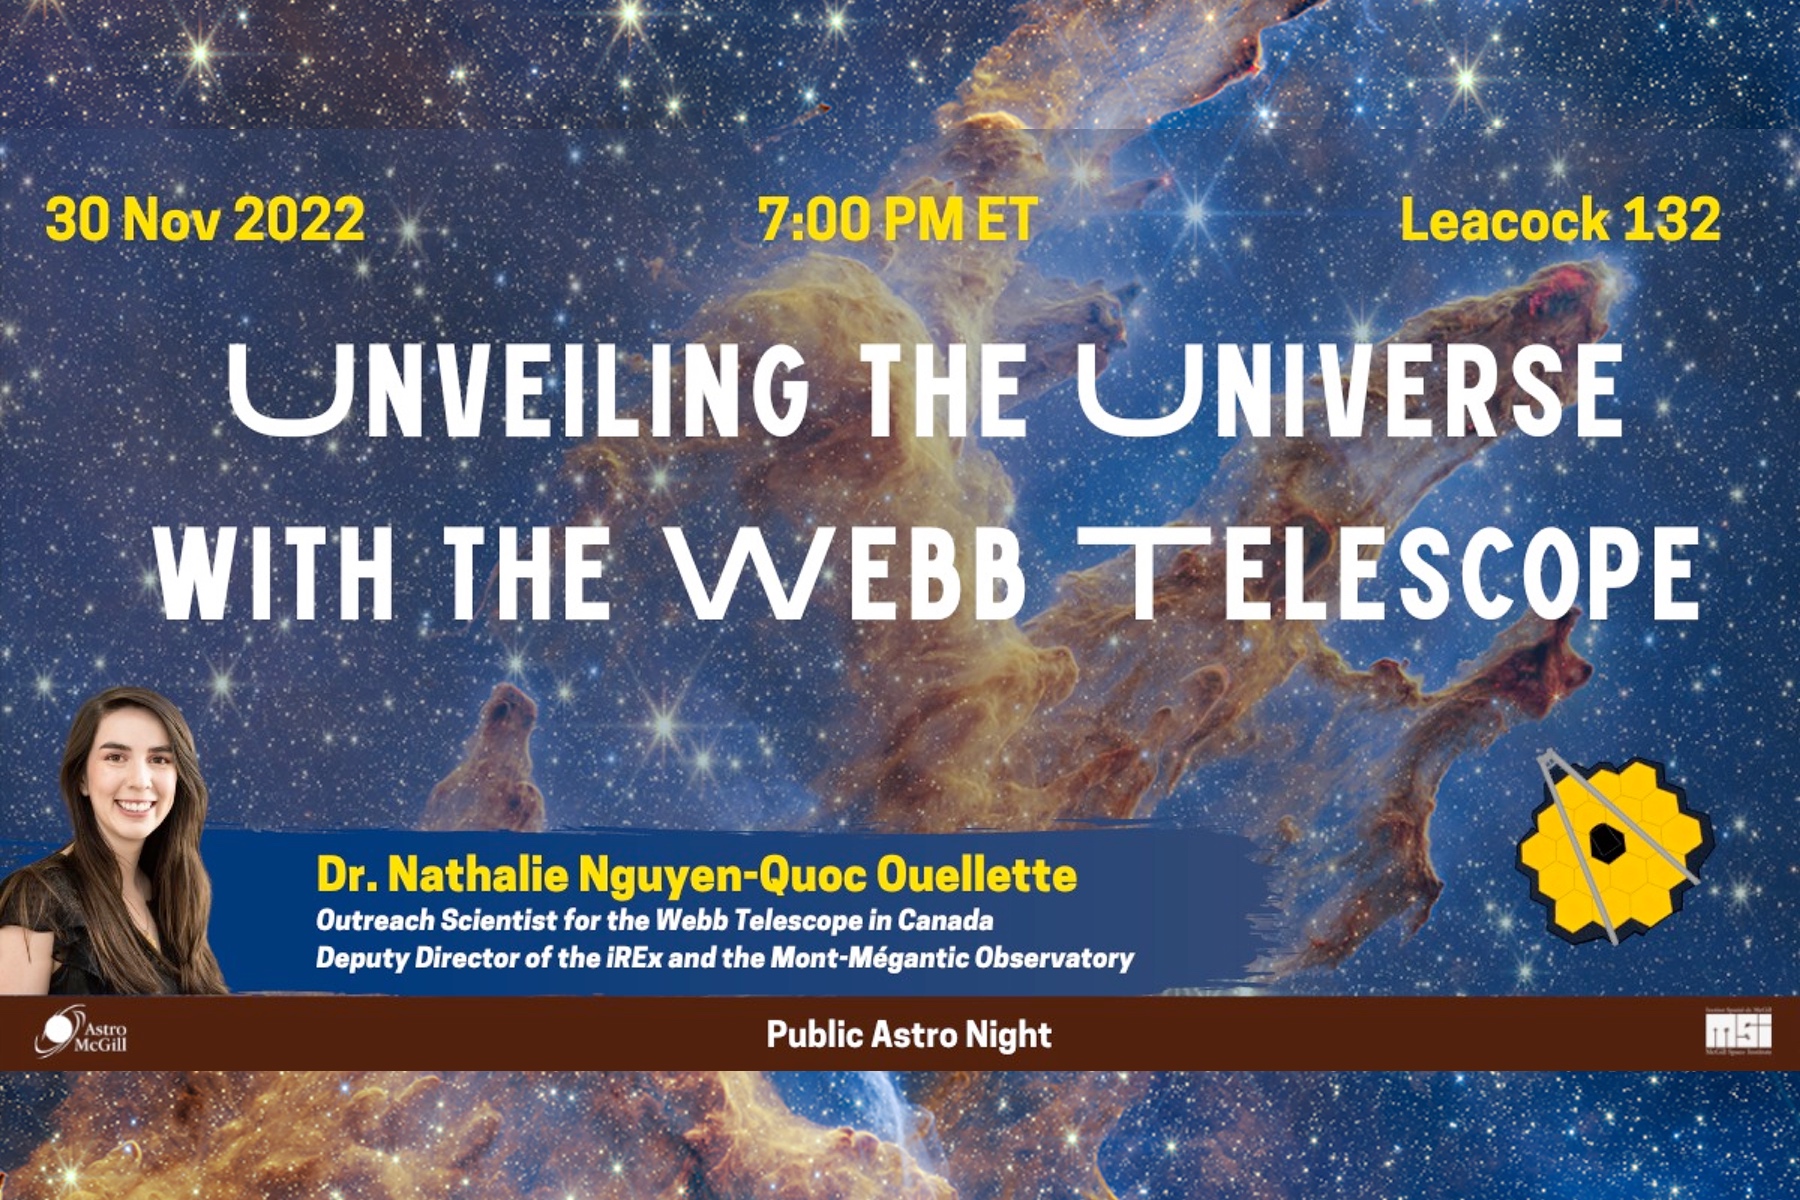 Public Astro Night: Unveiling the Universe with Webb